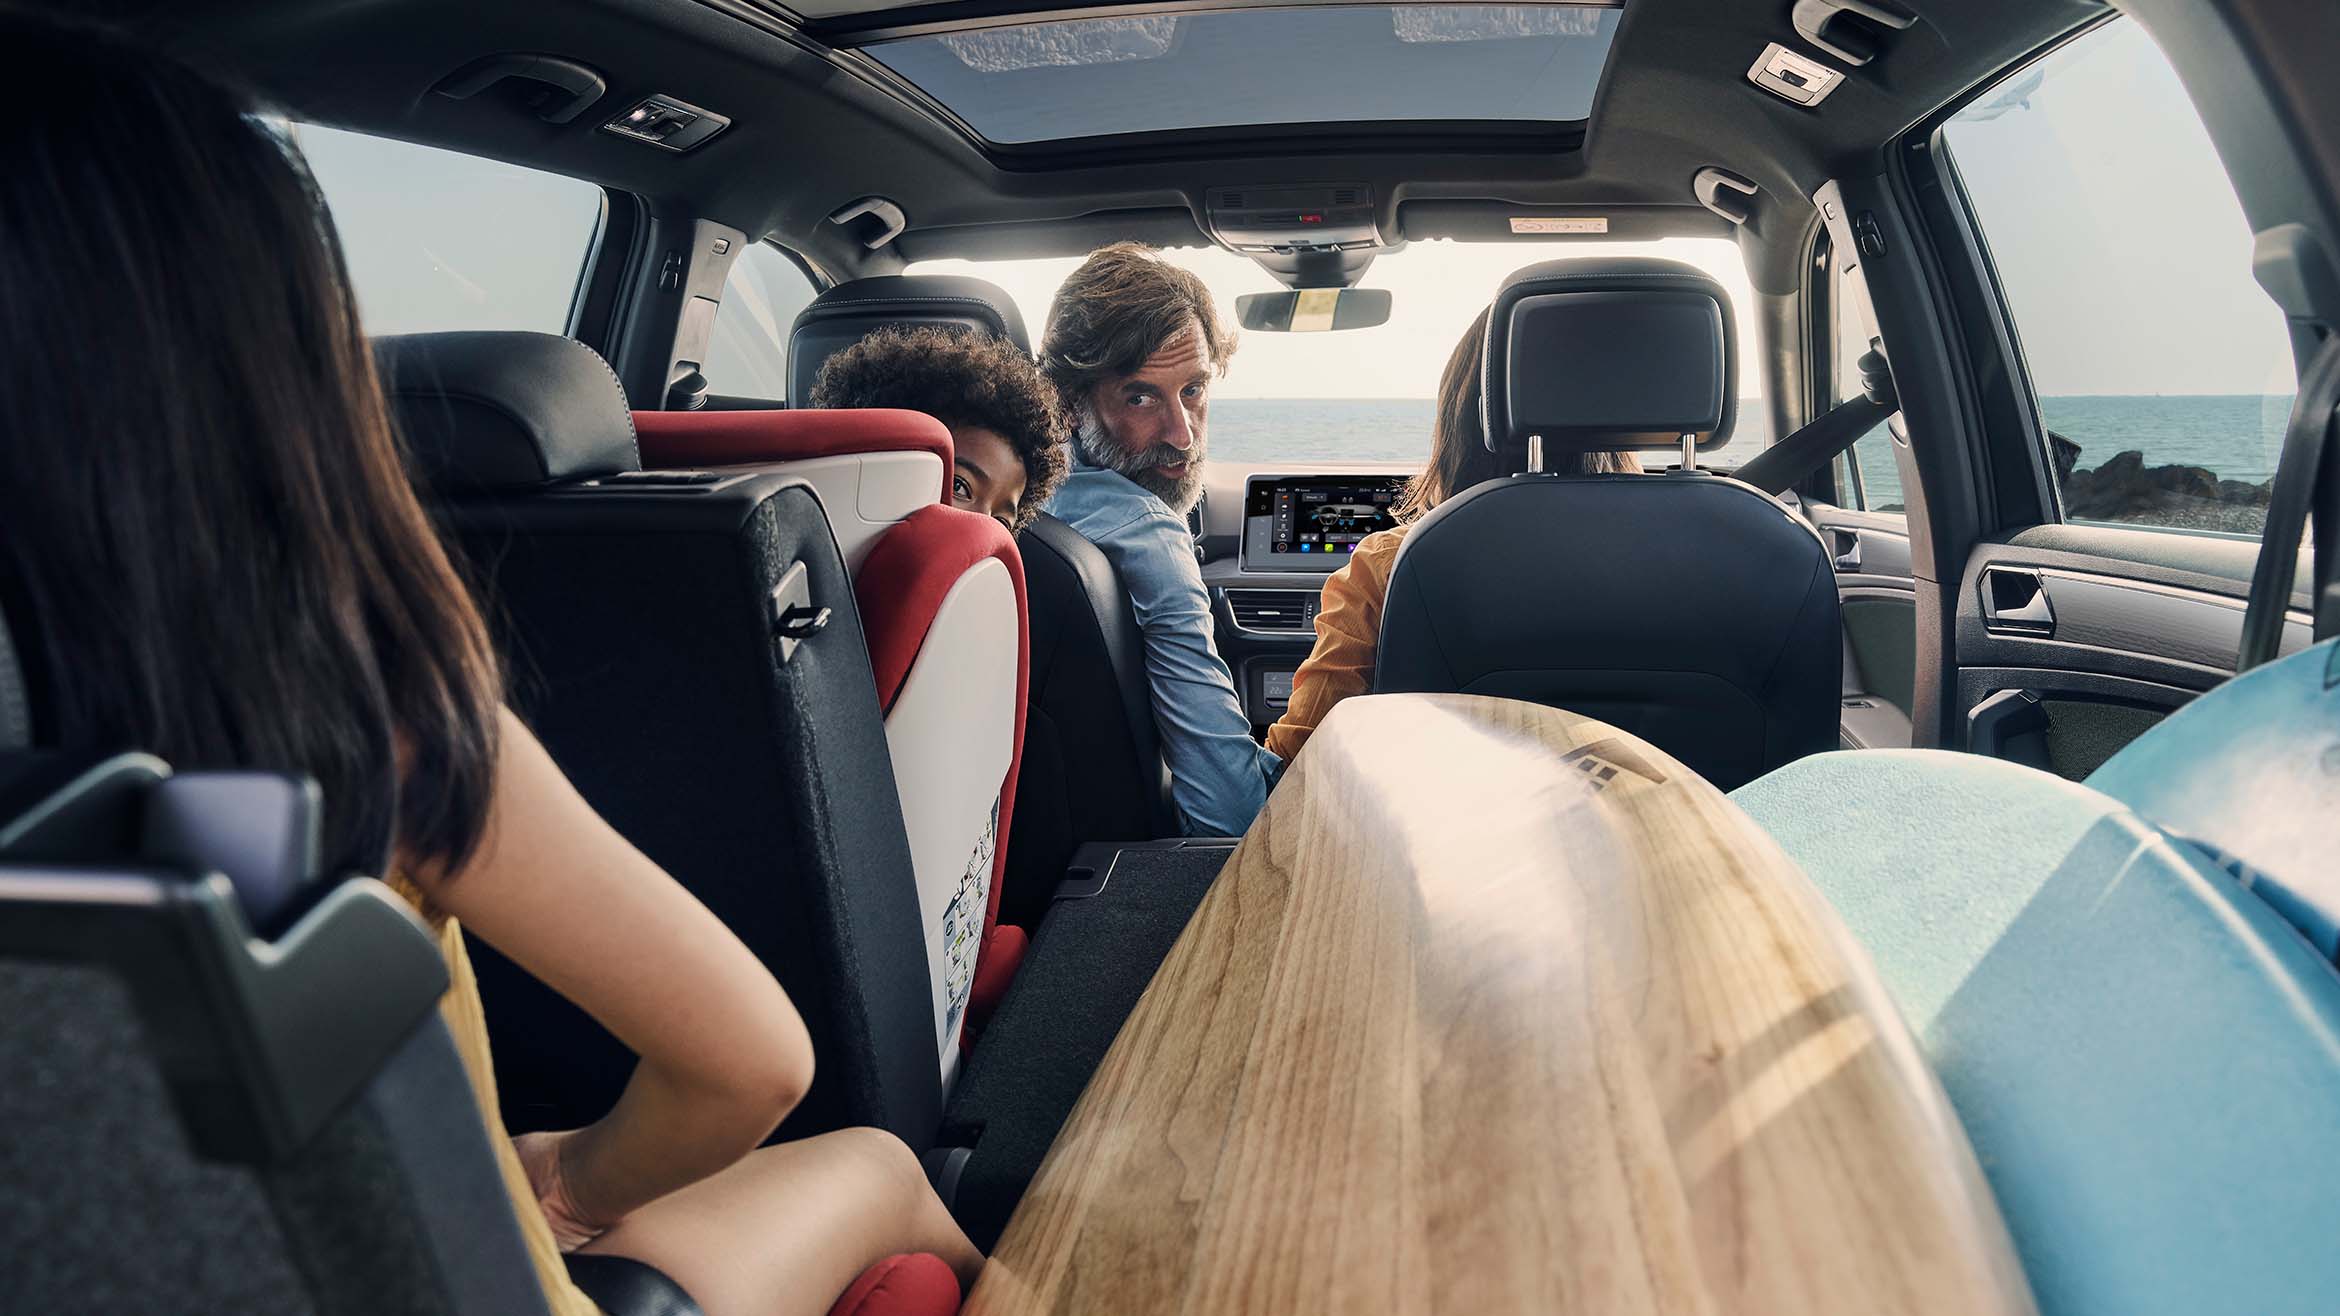 The new SEAT Tarraco XPERIENCE with family in car